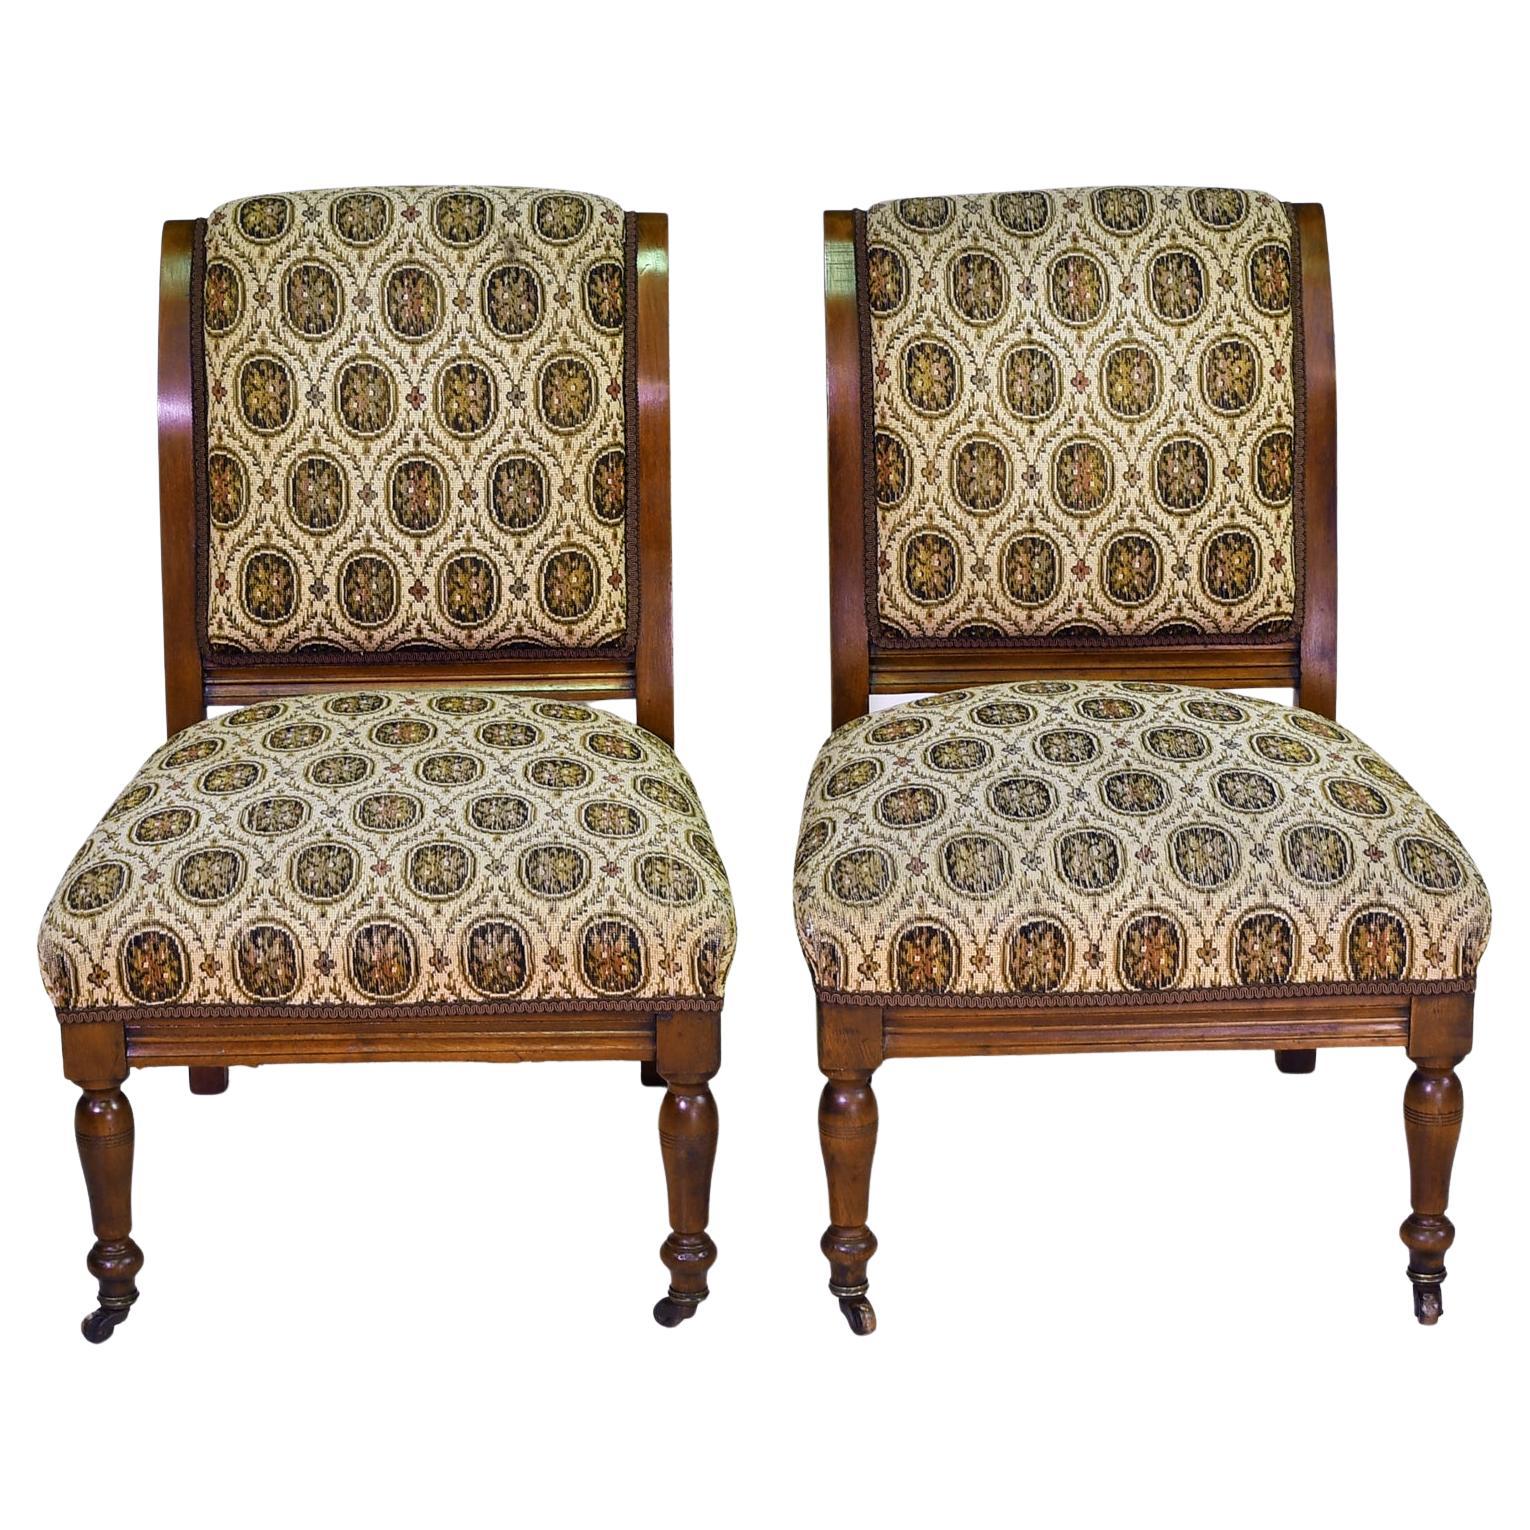 A pair of early American Victorian slipper chairs in walnut with upholstered back & seat, circa 1840. Features an outward scrolled back, carved seat rail & turned front legs. Original upholstered framework has springs, designed for added comfort.